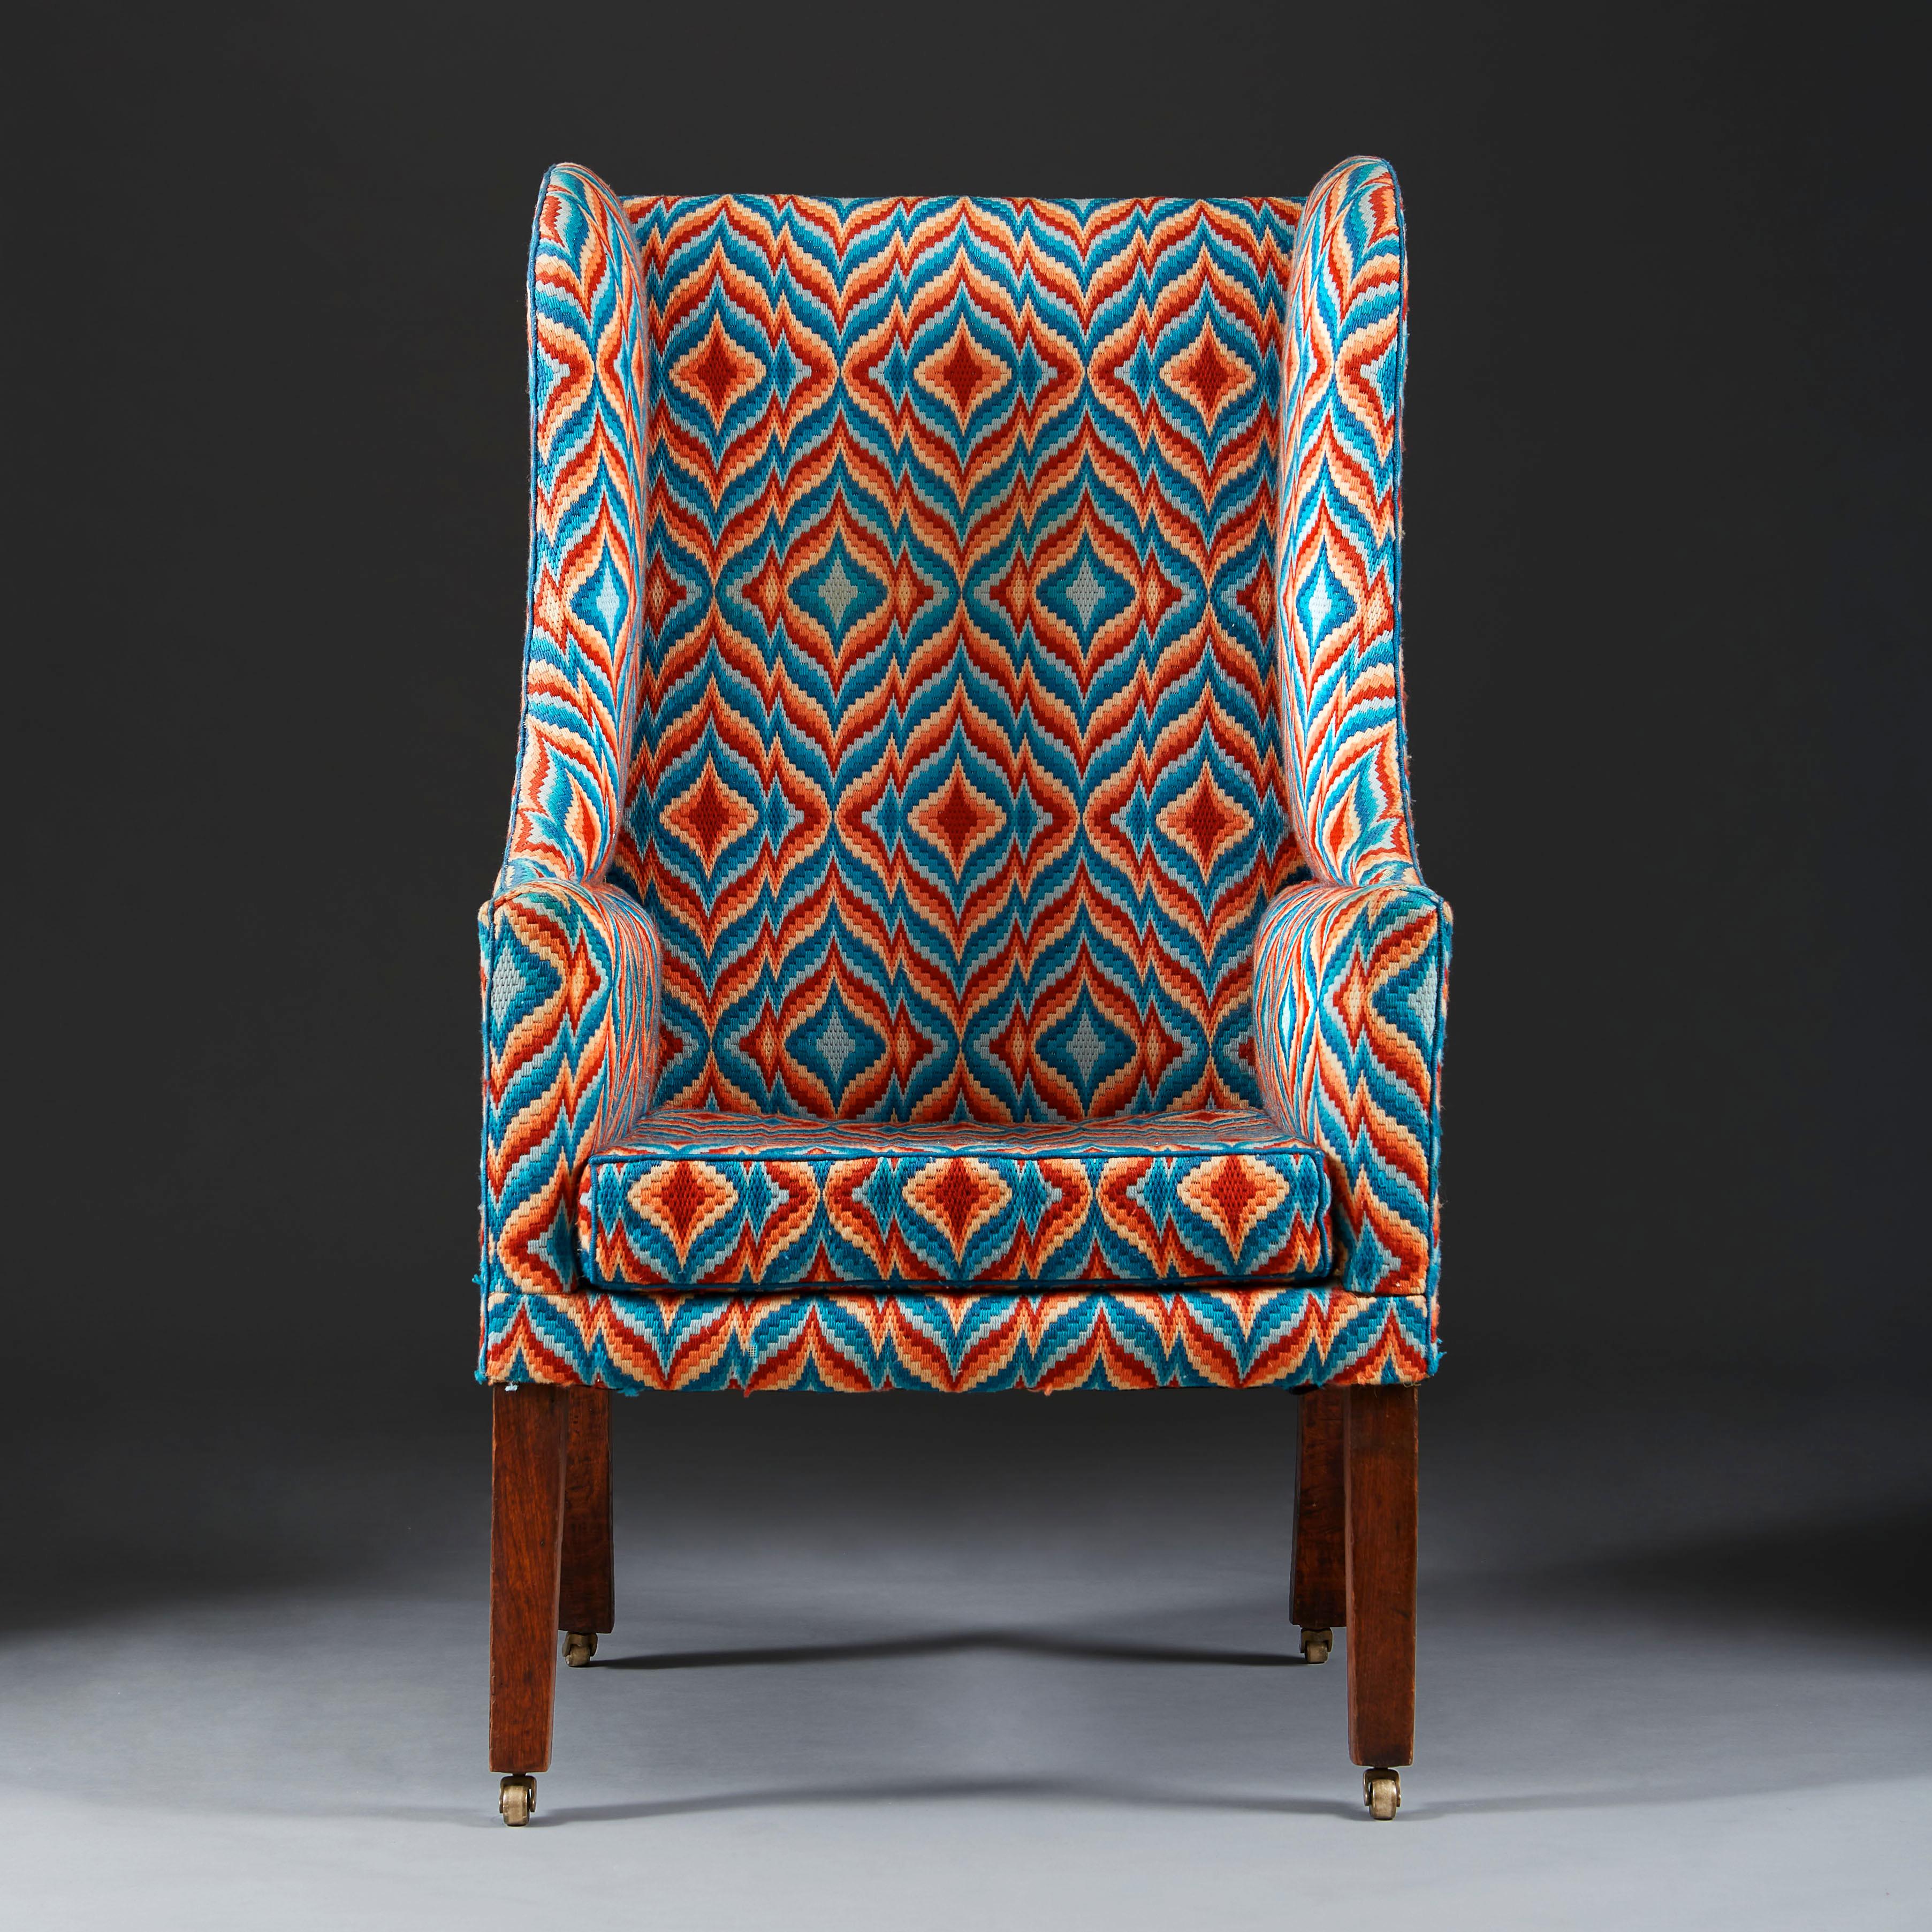 A fine early 19th century wingback armchair with mahogany legs, with bargello flame stitch needlework.

The chair, 19th century. The needlework, mid-20th century.

   